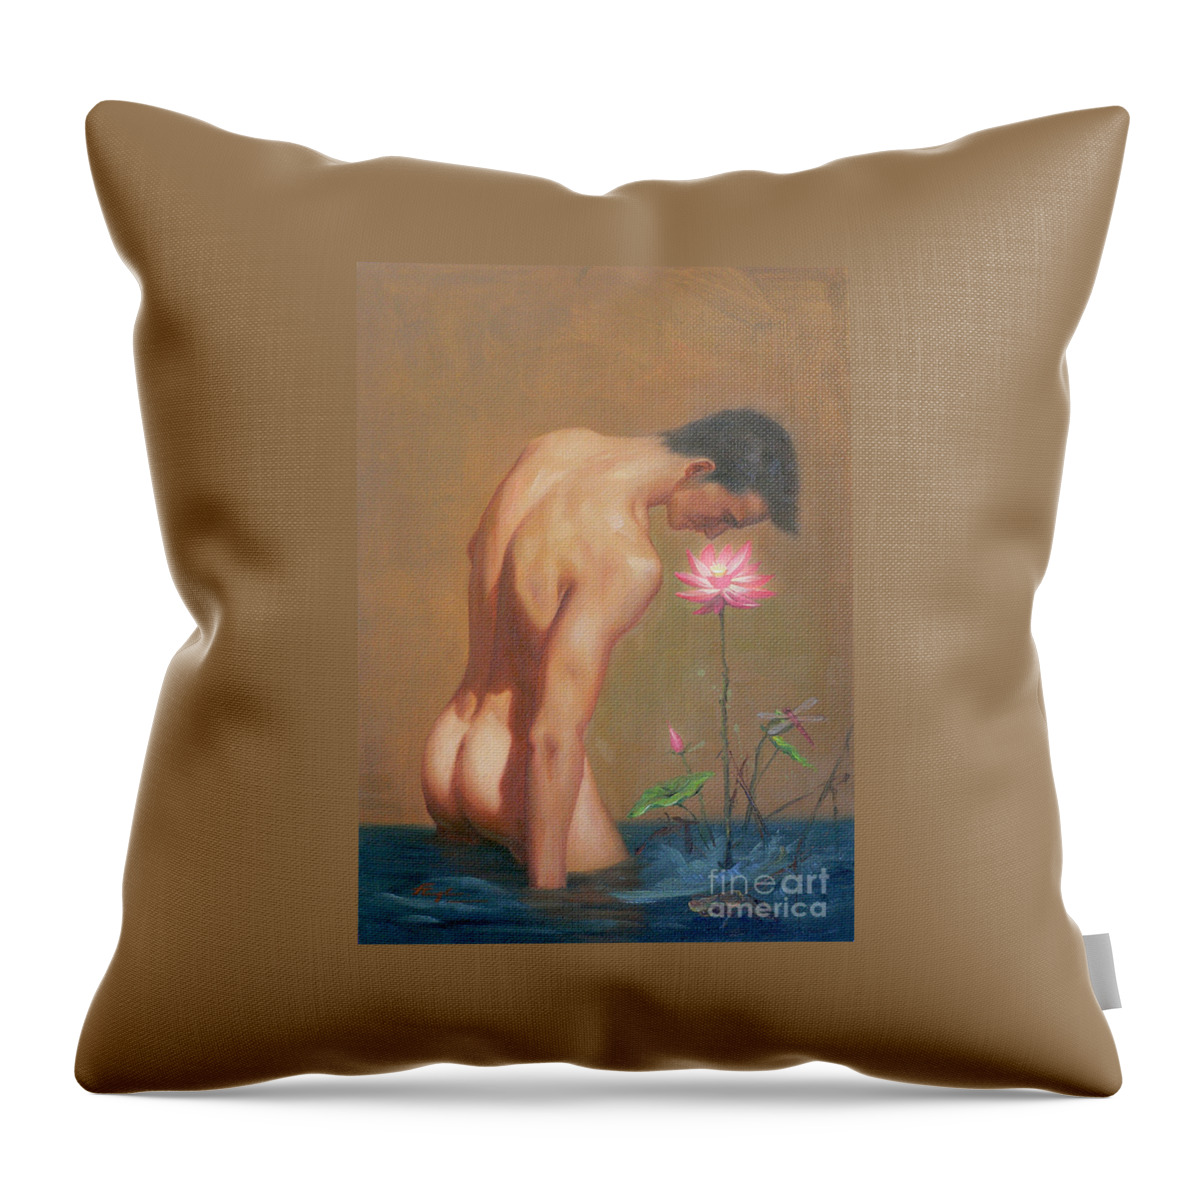 Original Throw Pillow featuring the painting Original Oil Painting Man Body Art-male Nude And Lotus#16-2-1-01 by Hongtao Huang